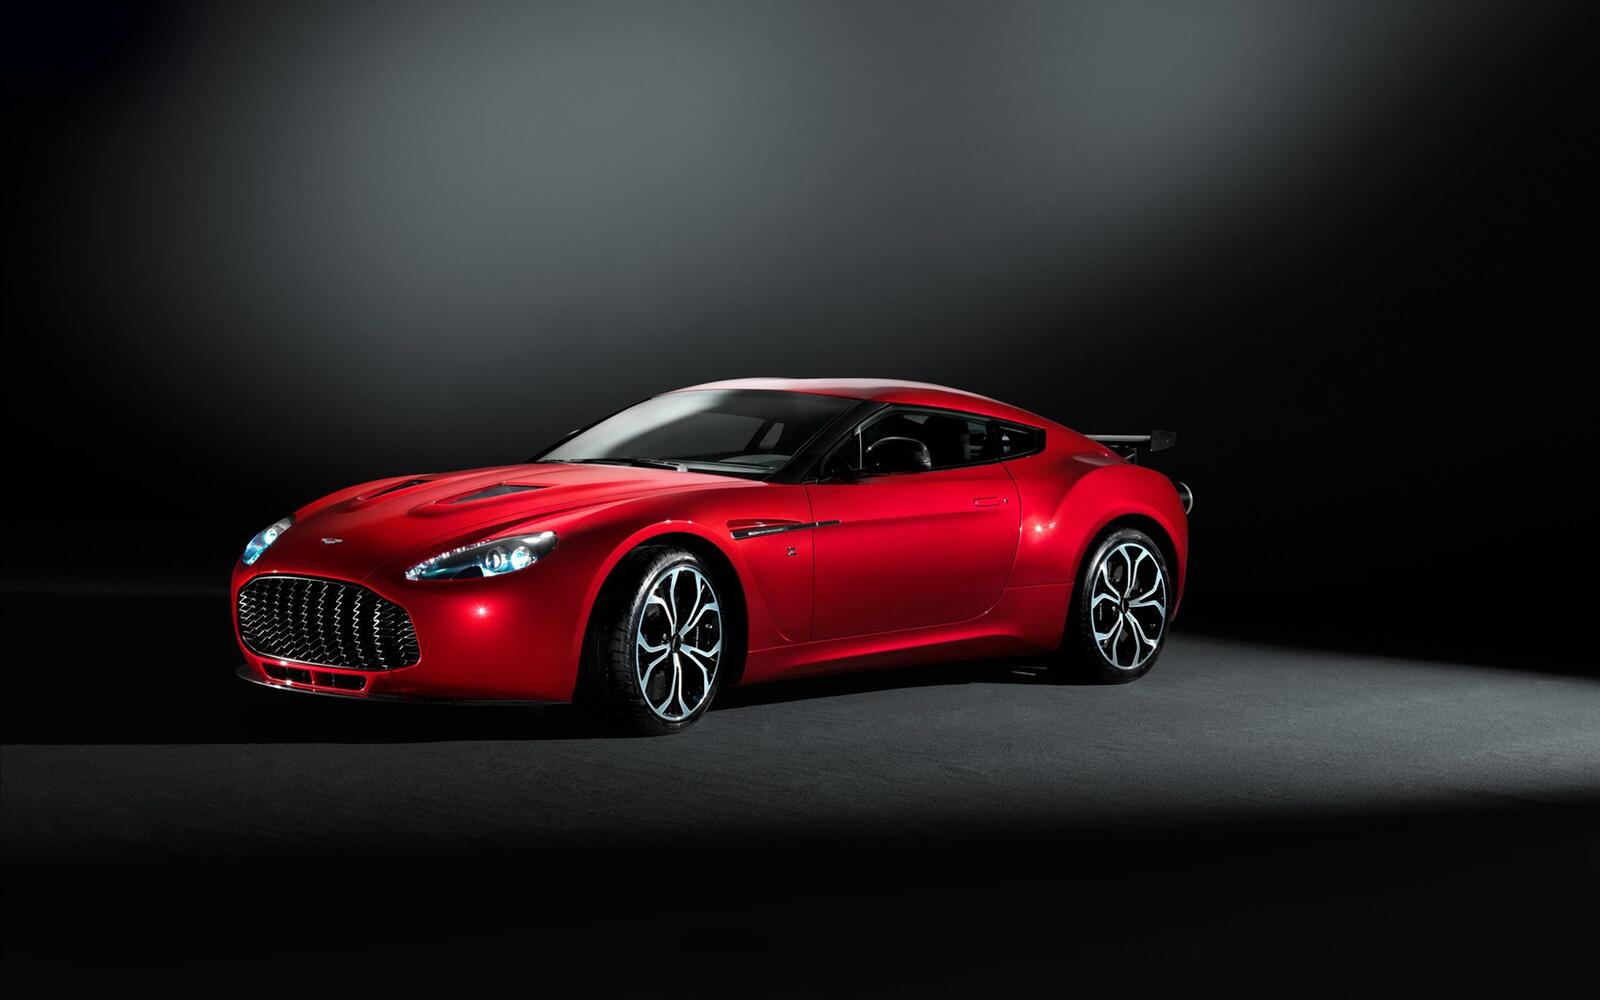 Wallpapers aston martin red super on the desktop